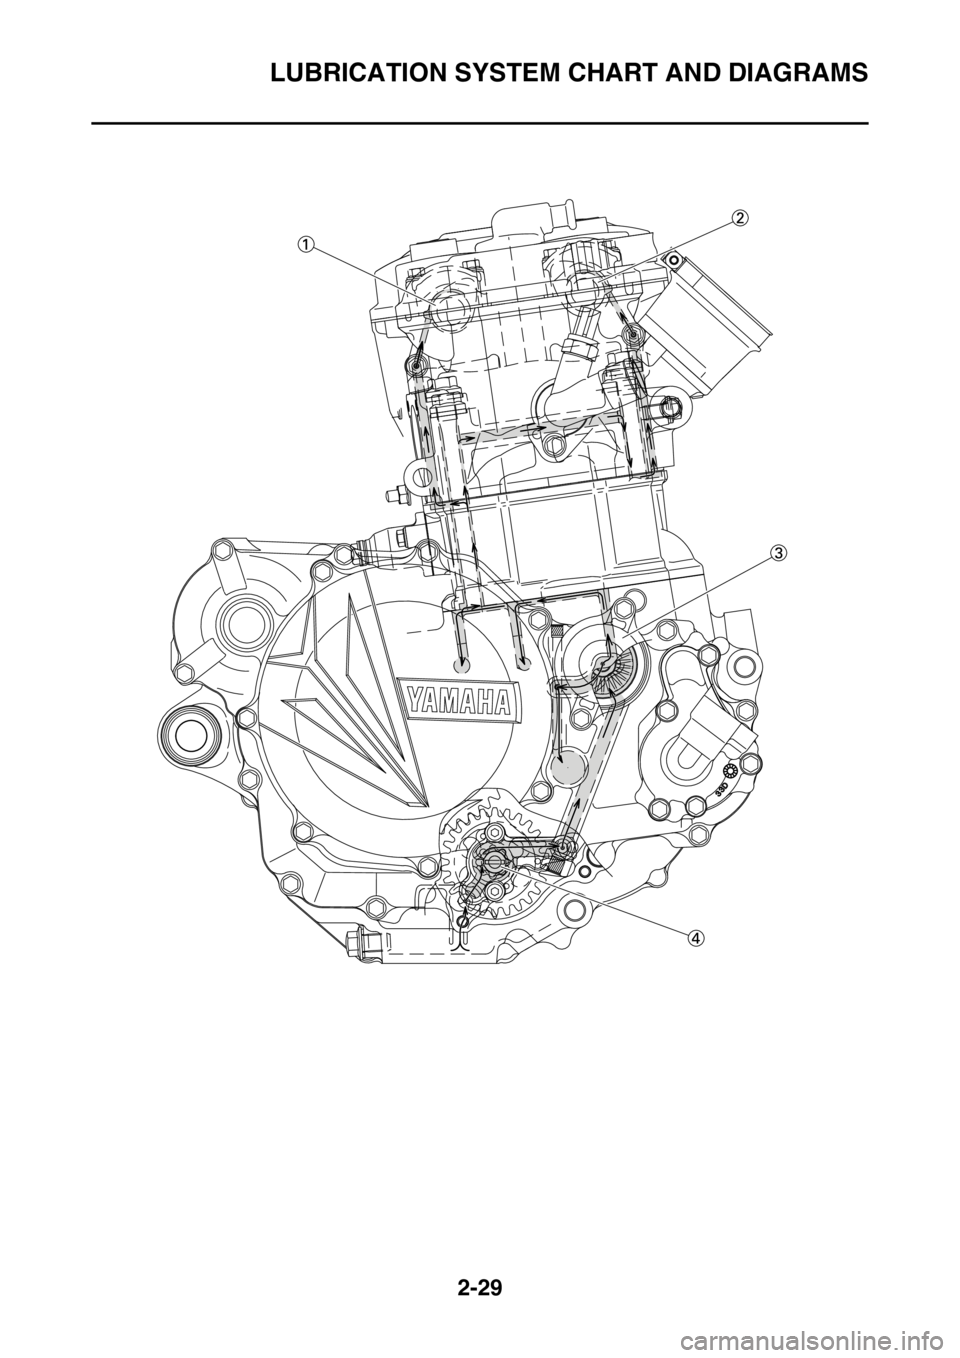 YAMAHA WR 450F 2016  Owners Manual LUBRICATION SYSTEM CHART AND DIAGRAMS
2-29 